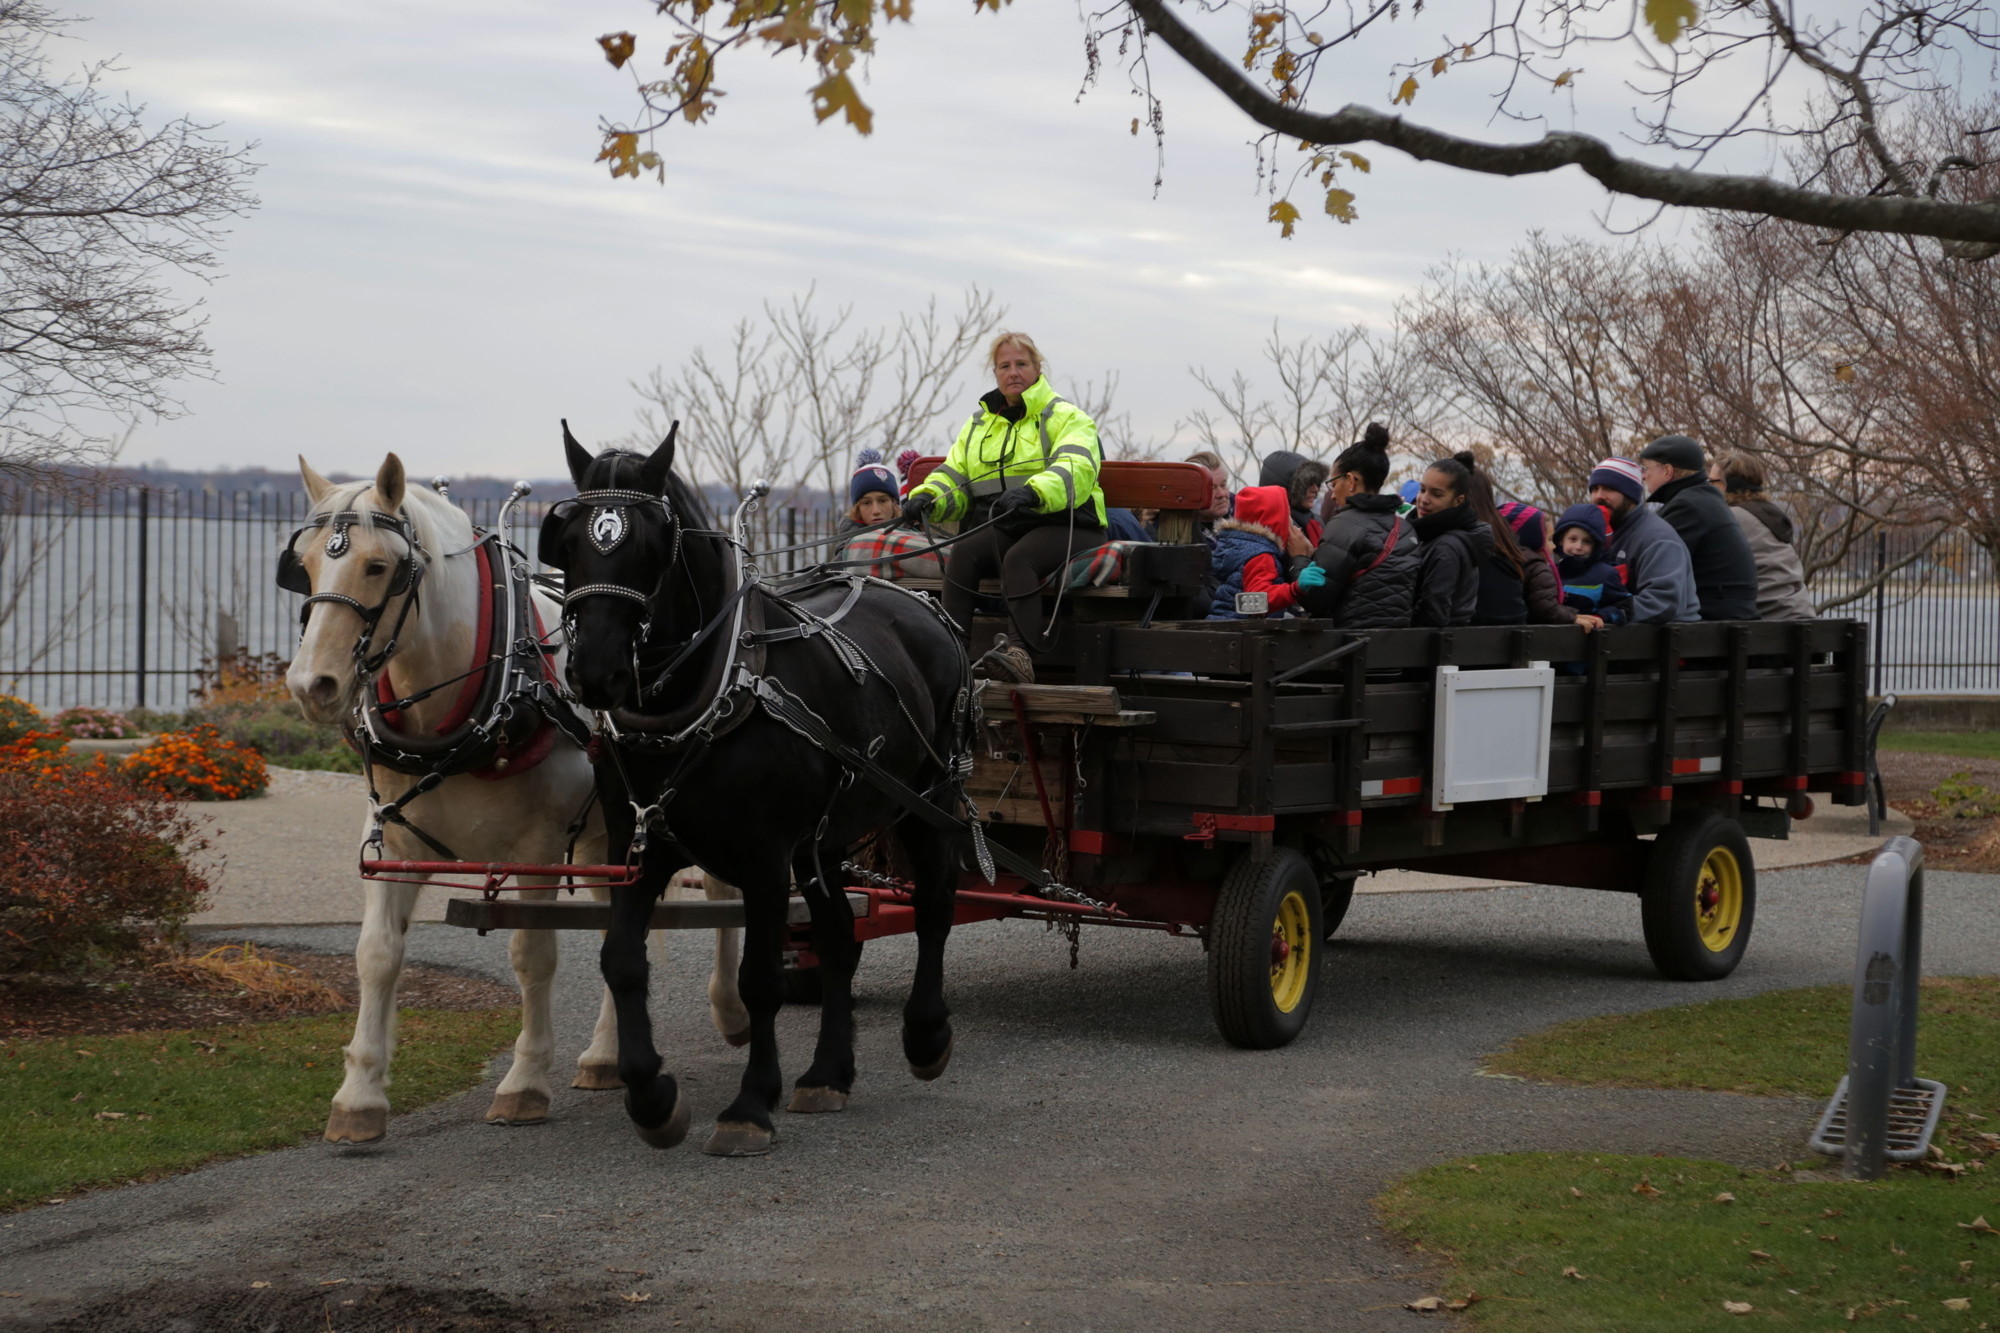 The holiday horse drawn carriage rounds a corner inside Crescent Park with a full group of passengers.